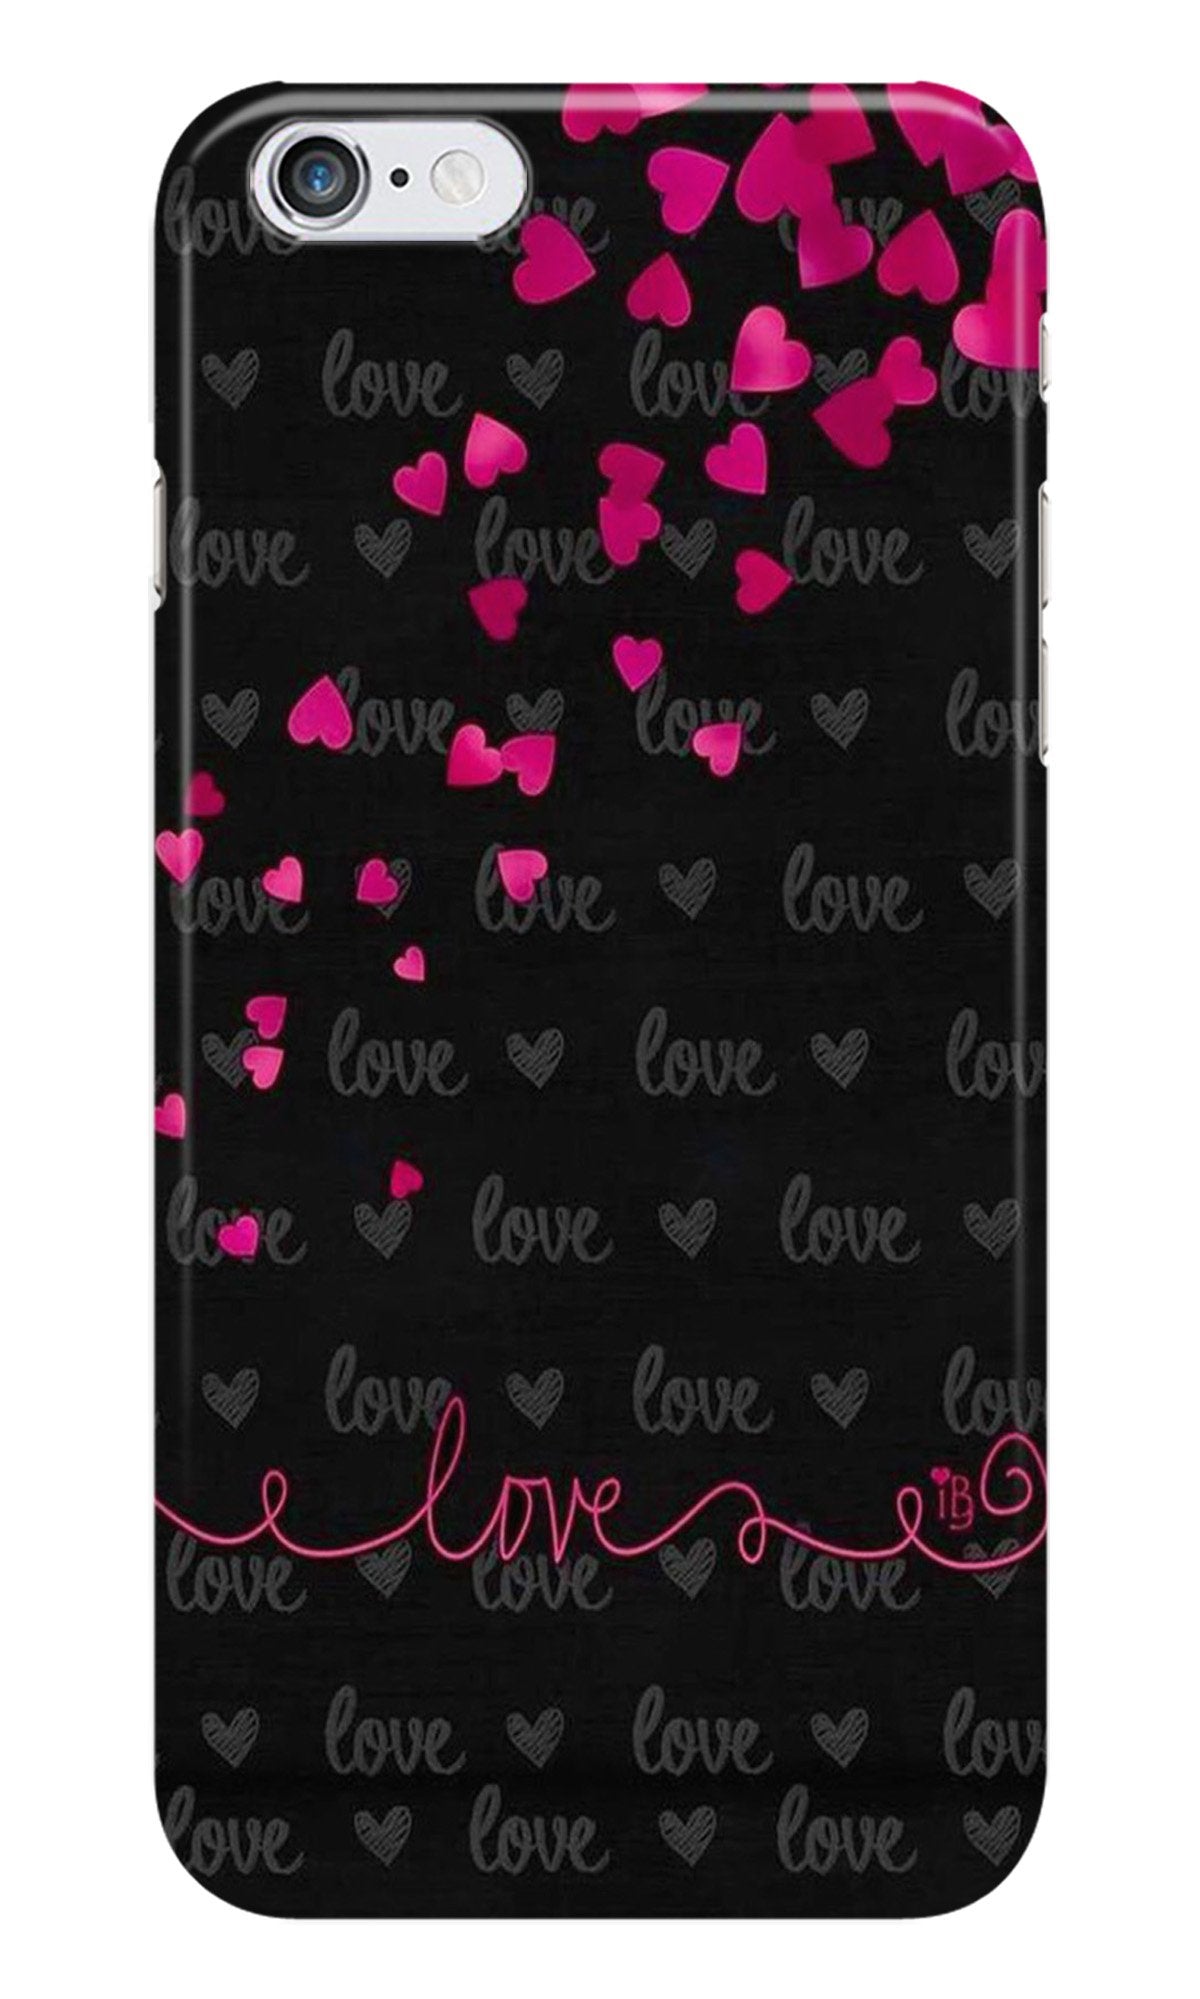 Love in Air Case for iPhone 6/ 6s